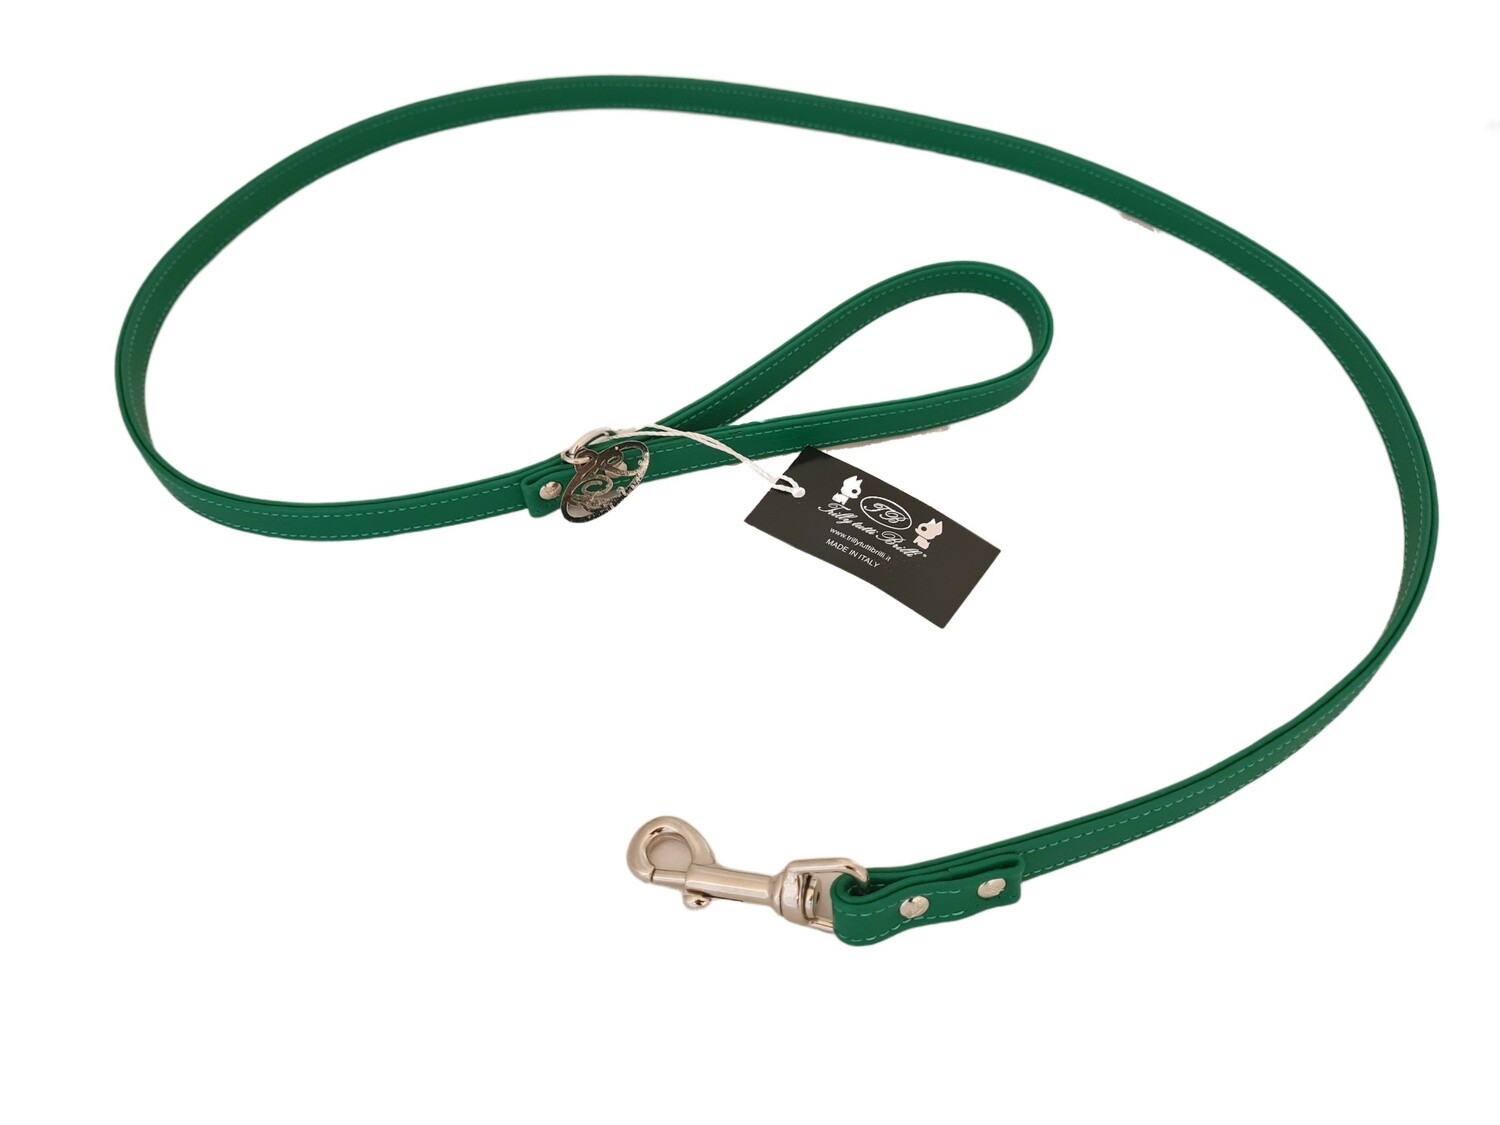 Lione Leash Trilly 16 Emerald green - Stock